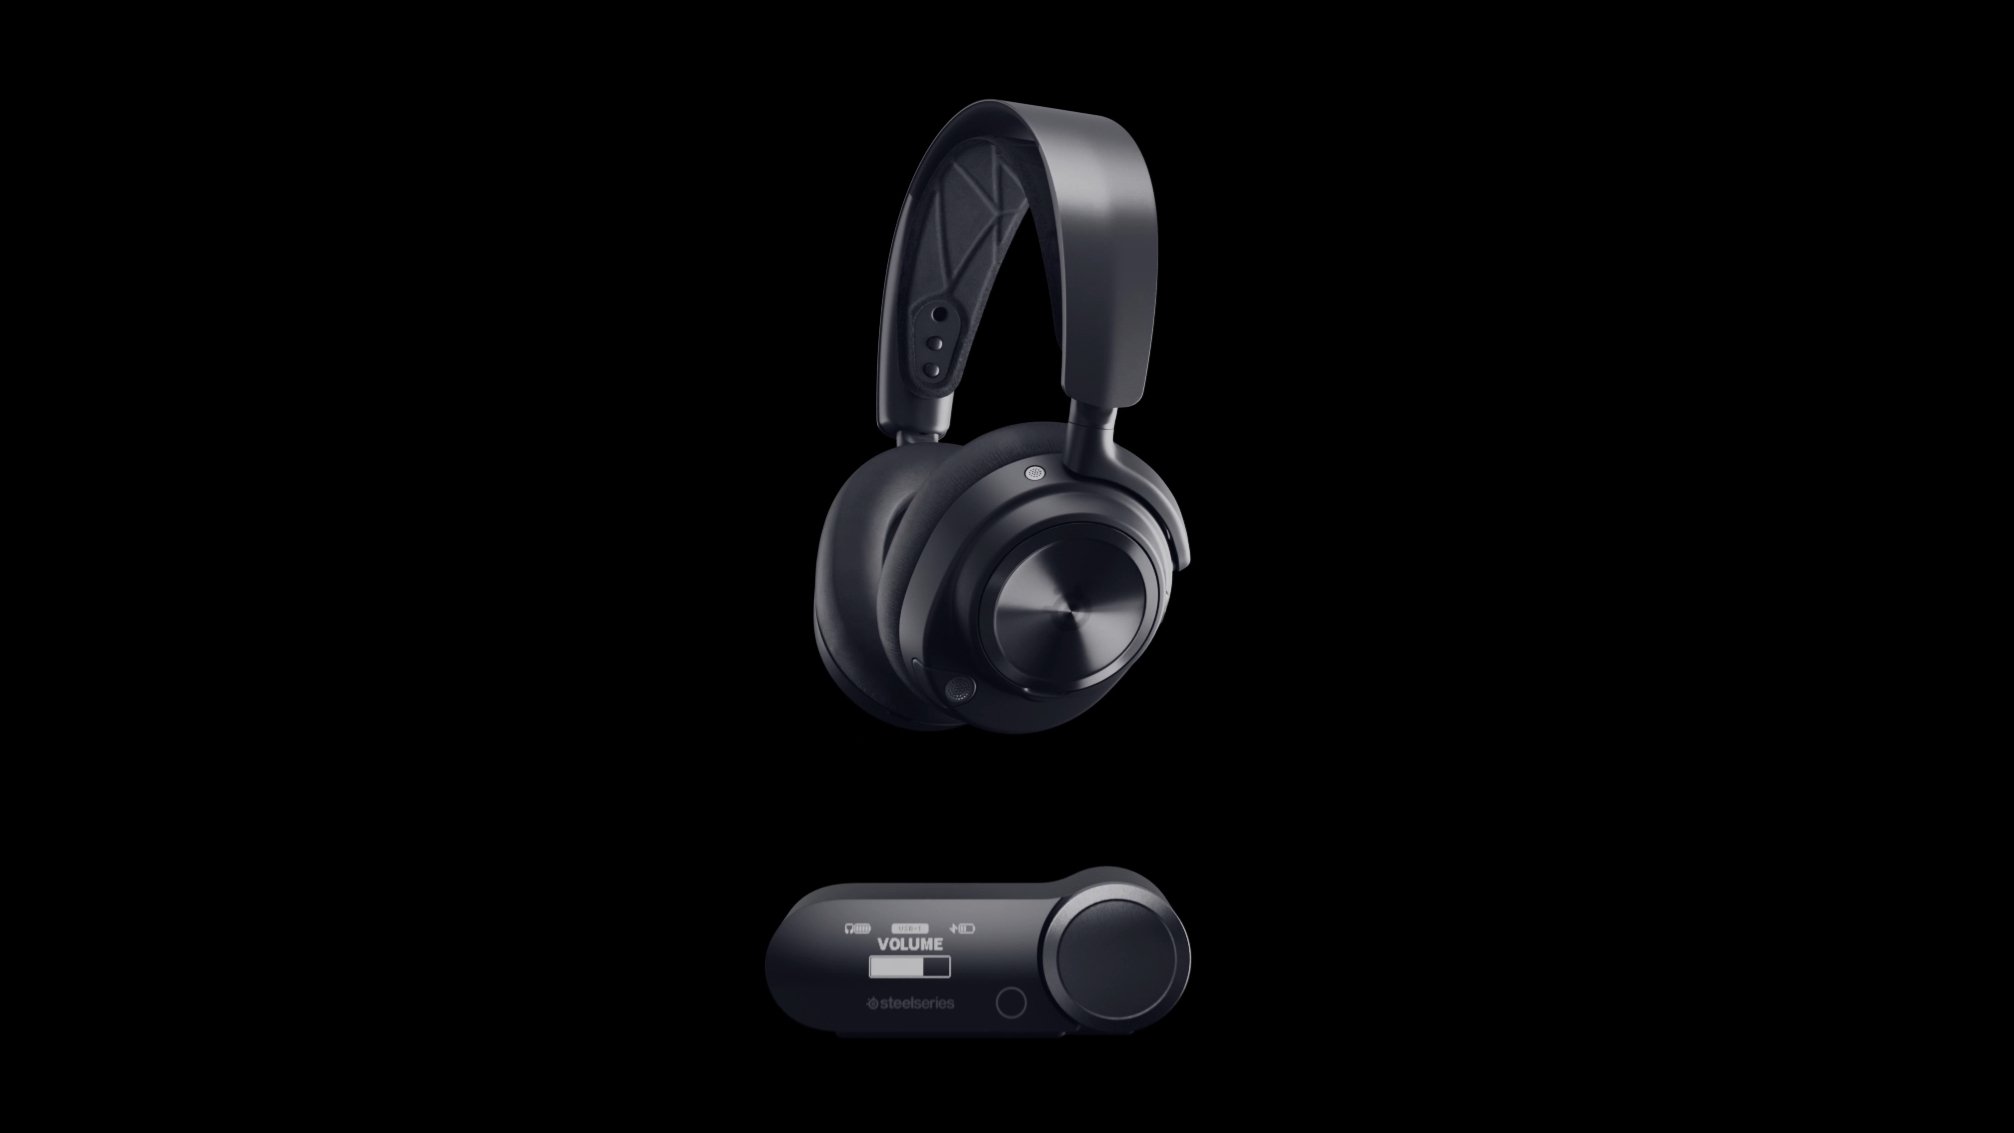 Leading gaming brand SteelSeries launch 'best headset ever